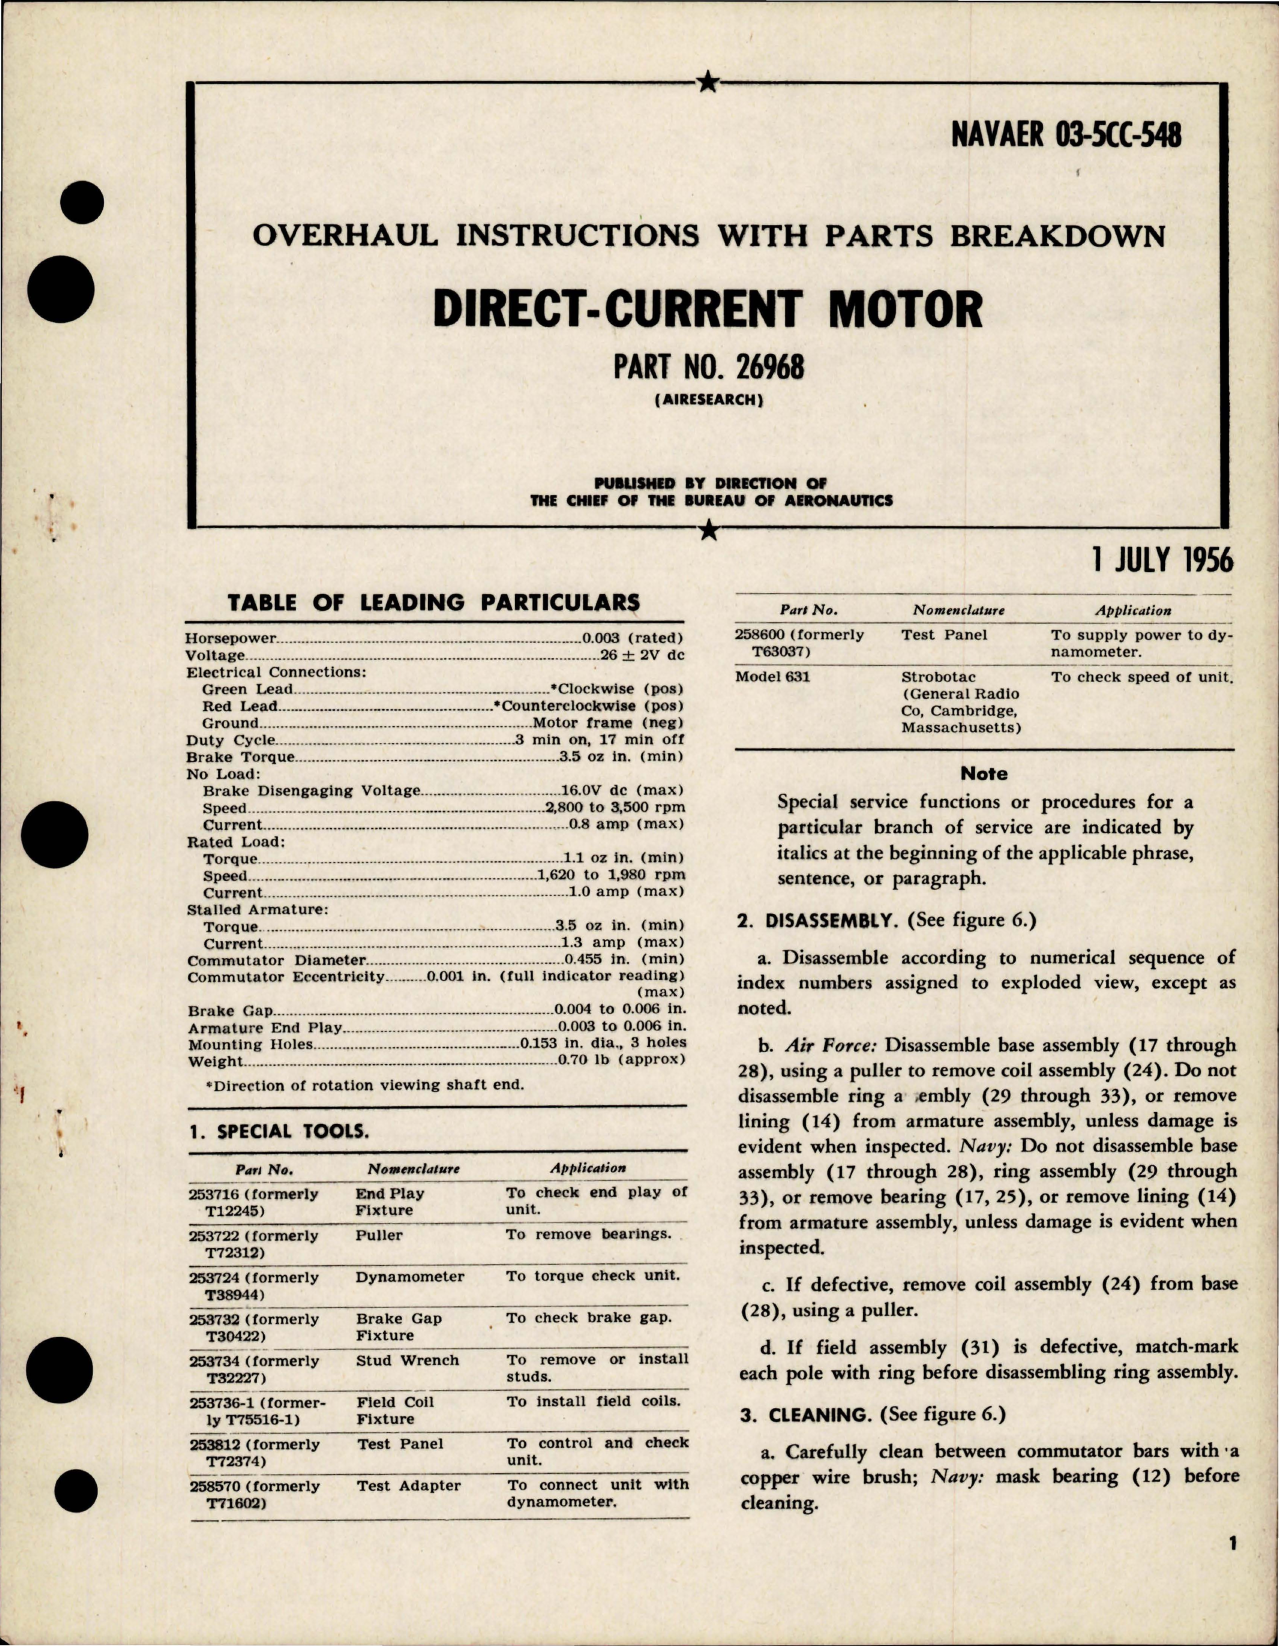 Sample page 1 from AirCorps Library document: Overhaul Instructions with Parts Breakdown for Direct Current Motor - Part 26968 